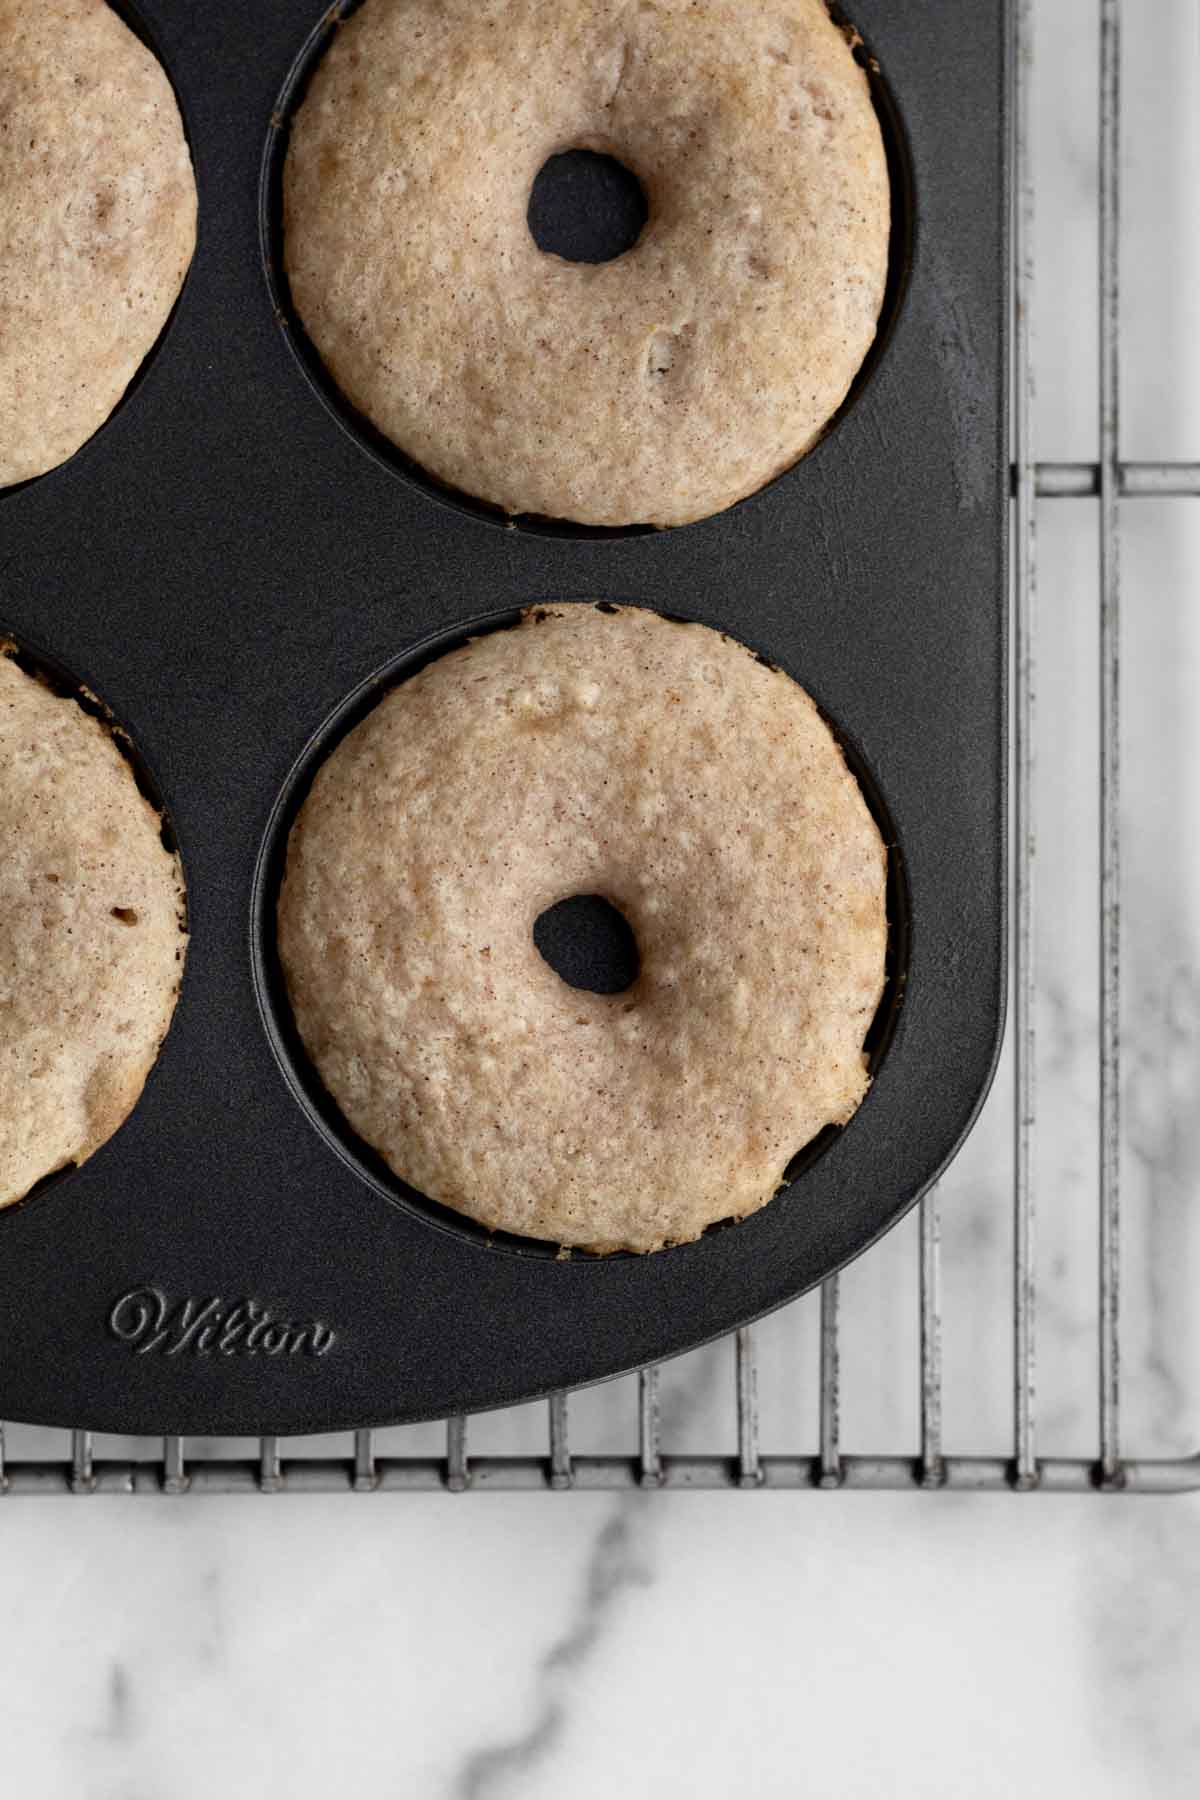 Baked donuts in the pan.